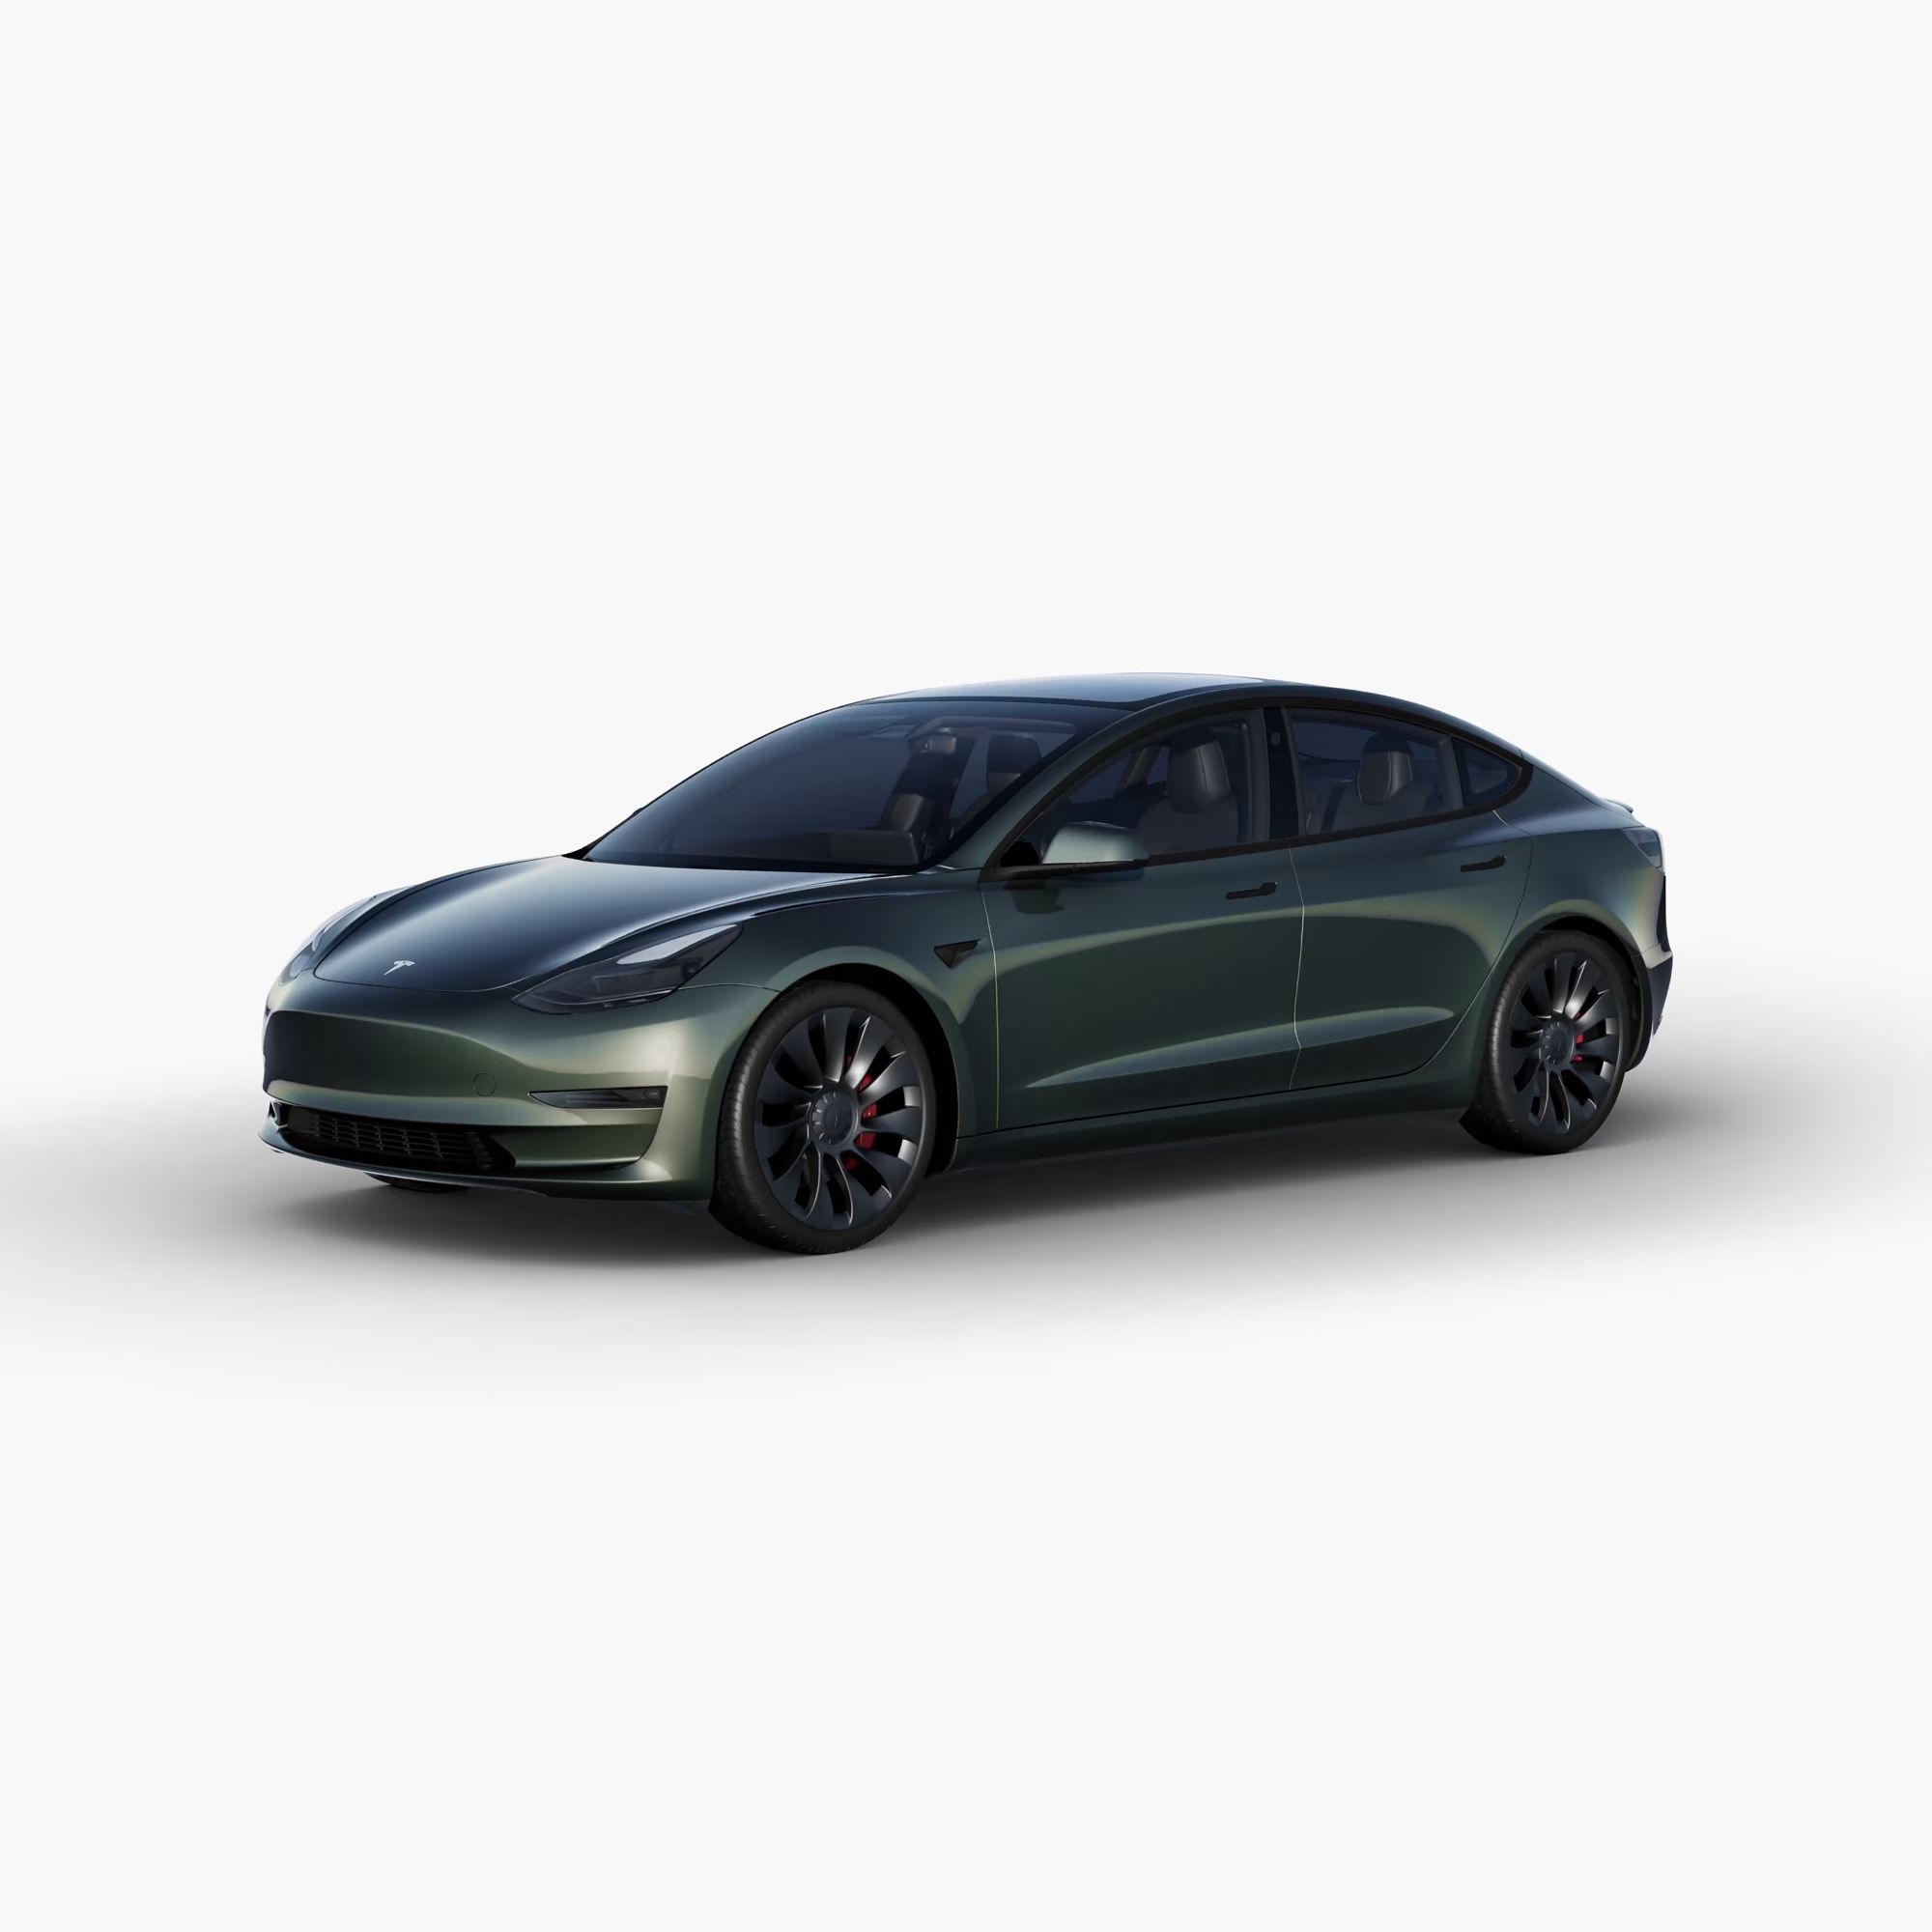 New discounts for existing vehicles Tesla Model 3 and Model Y - It